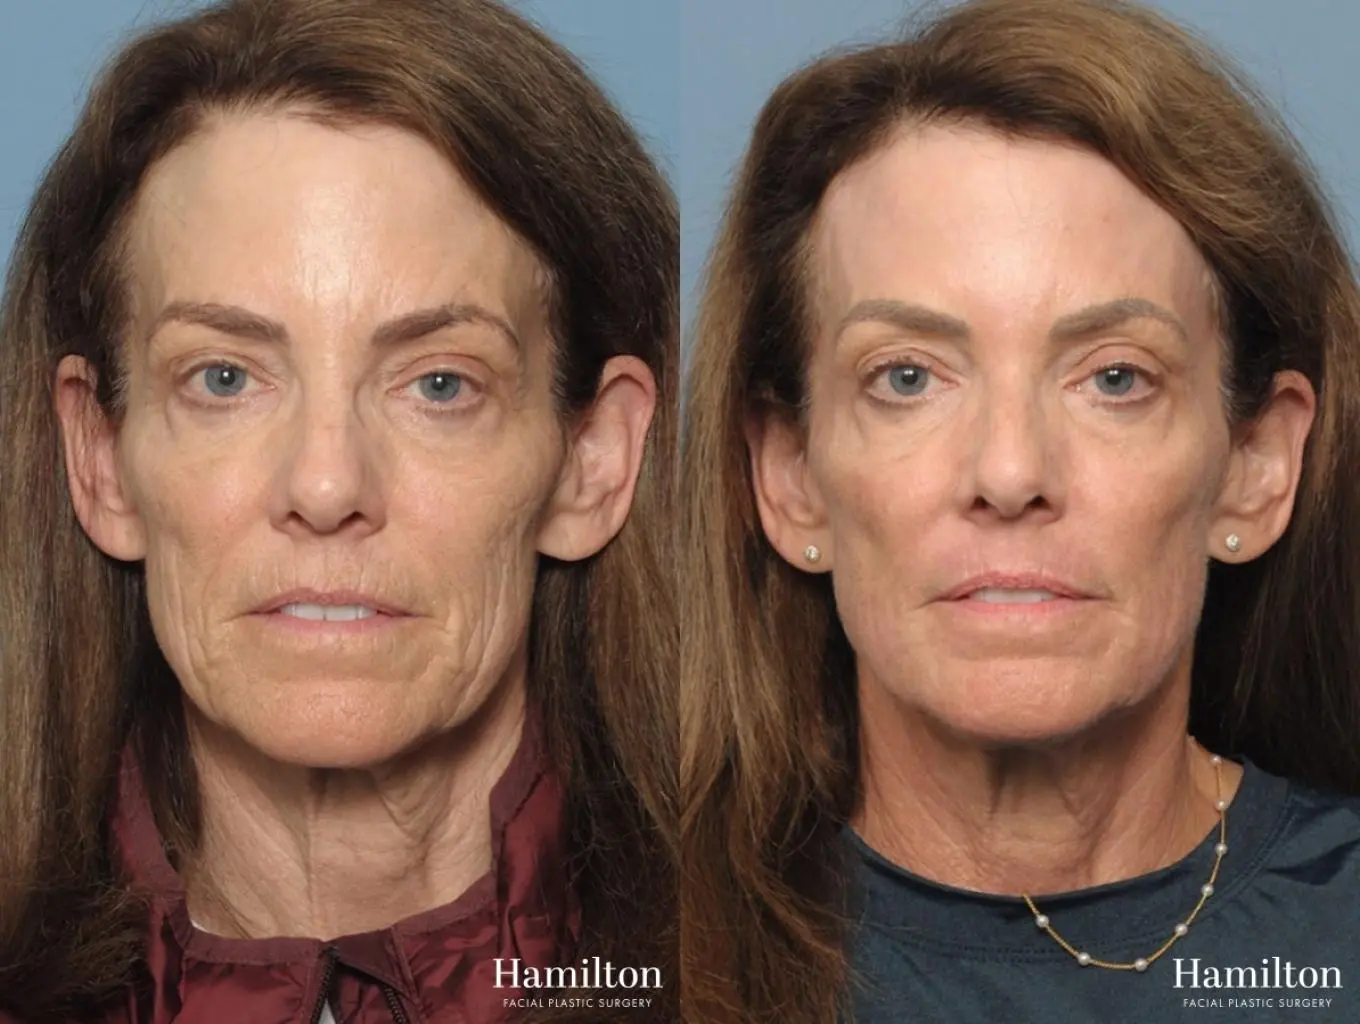 C02 Laser: Patient 3 - Before and After  